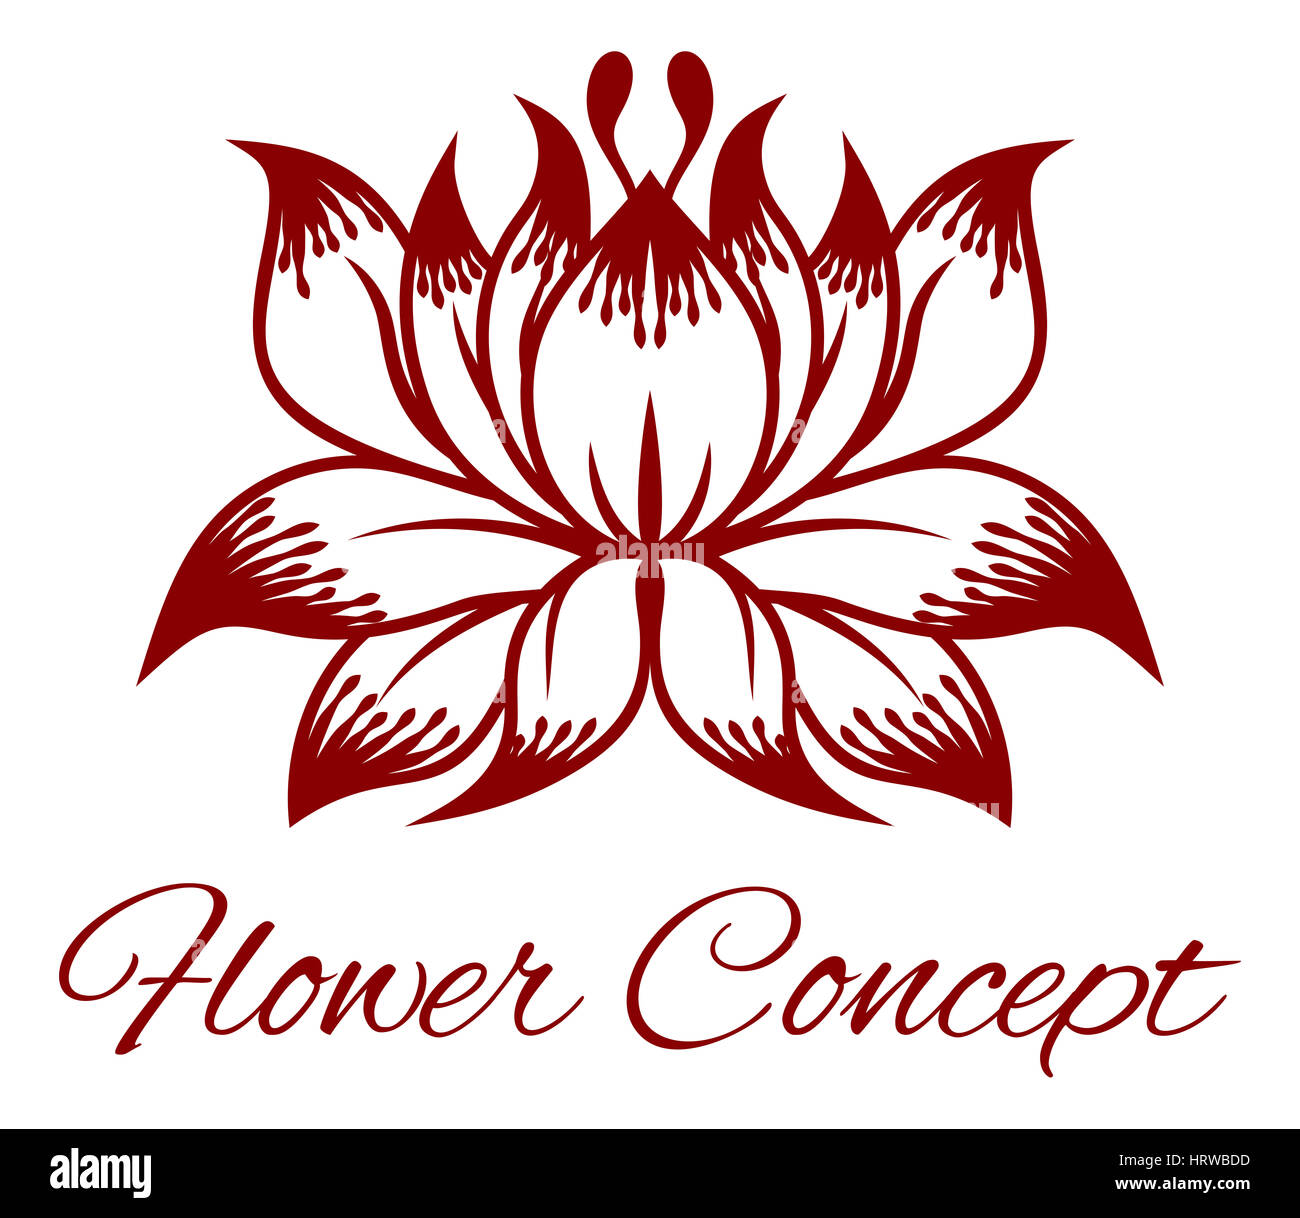 Flower abstarct floral design concept icon Stock Photo